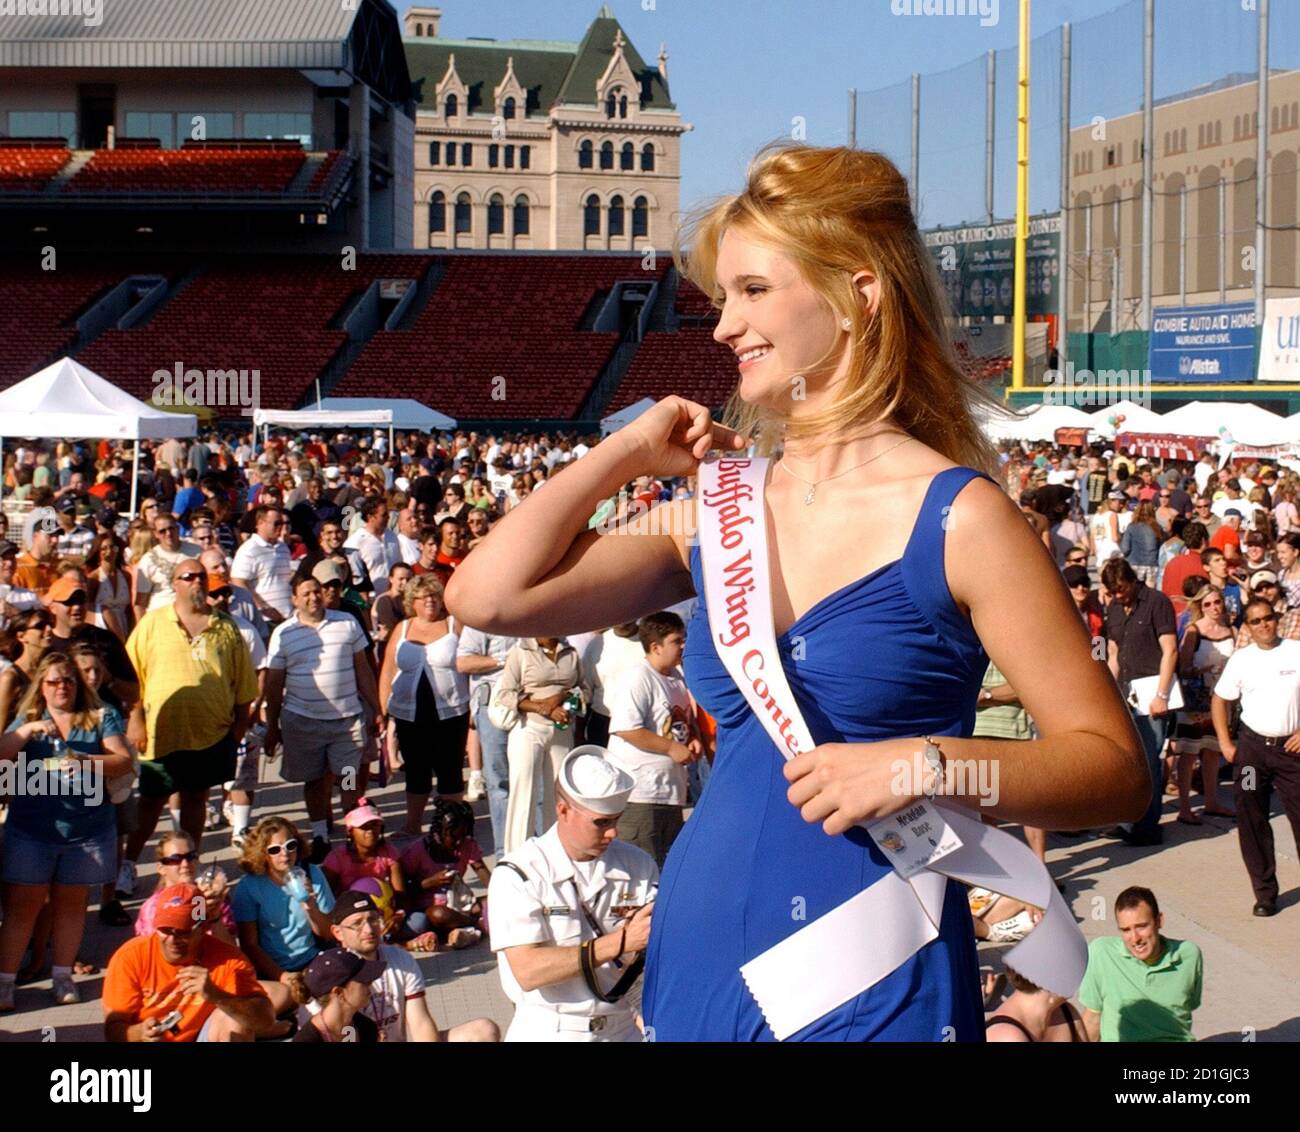 Meagan Rose Elliott prepares for the Miss Buffalo Wing beauty pageant the National Chicken Wing Festival in Buffalo, New York August 30, 2008. REUTERS/Gary Wiepert STATES Stock Photo - Alamy